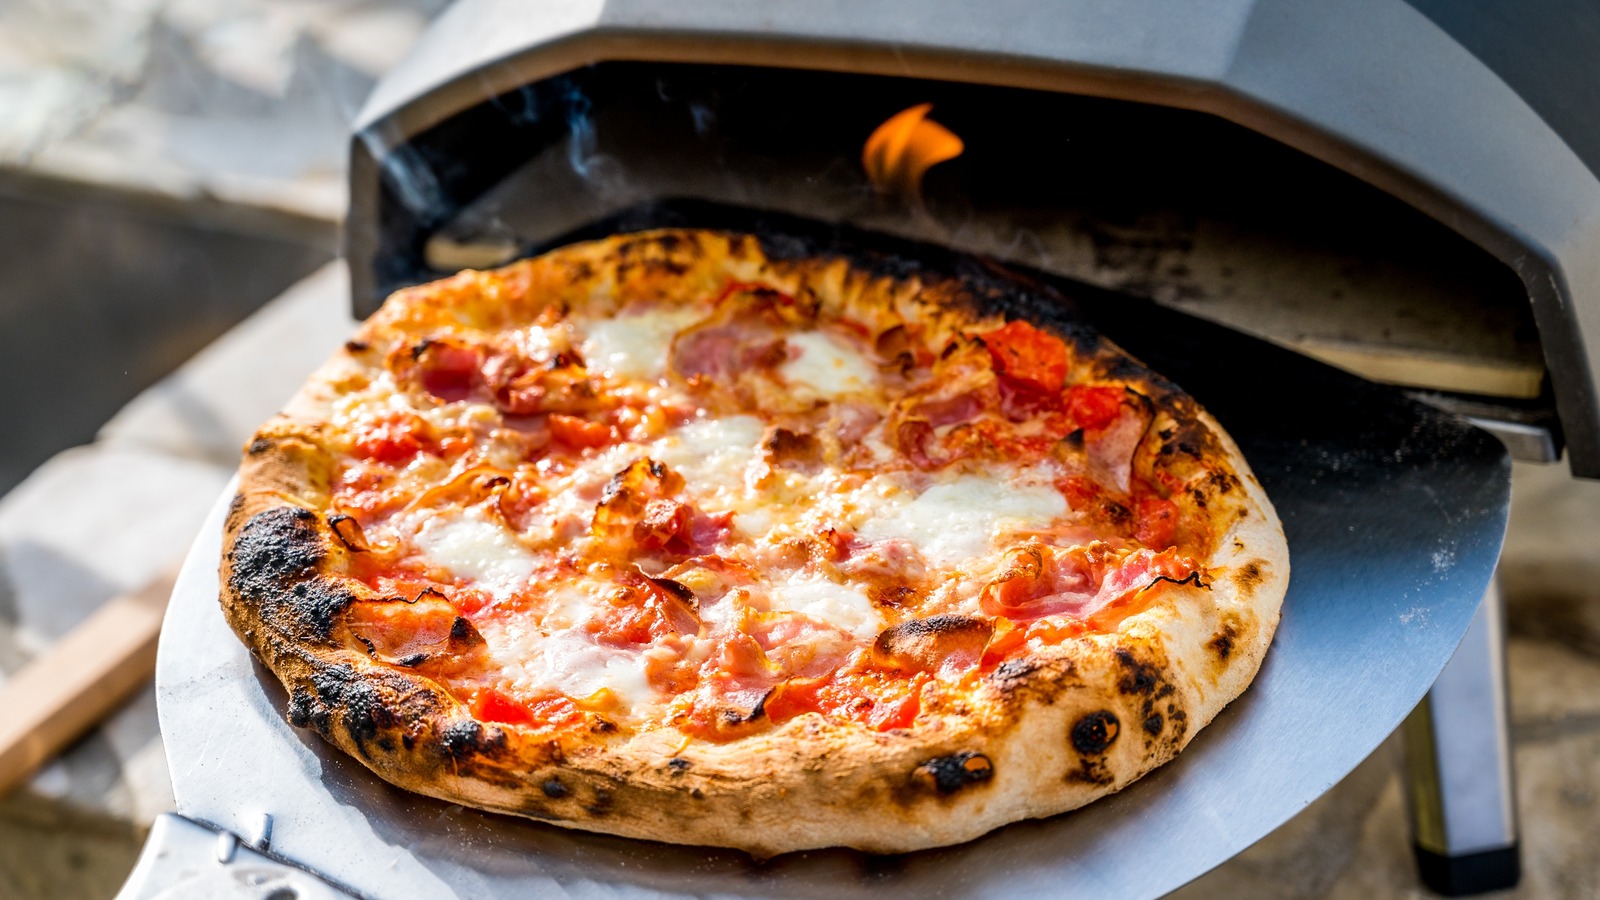 Making Pizza at Home: 5 Tips for a Great Result